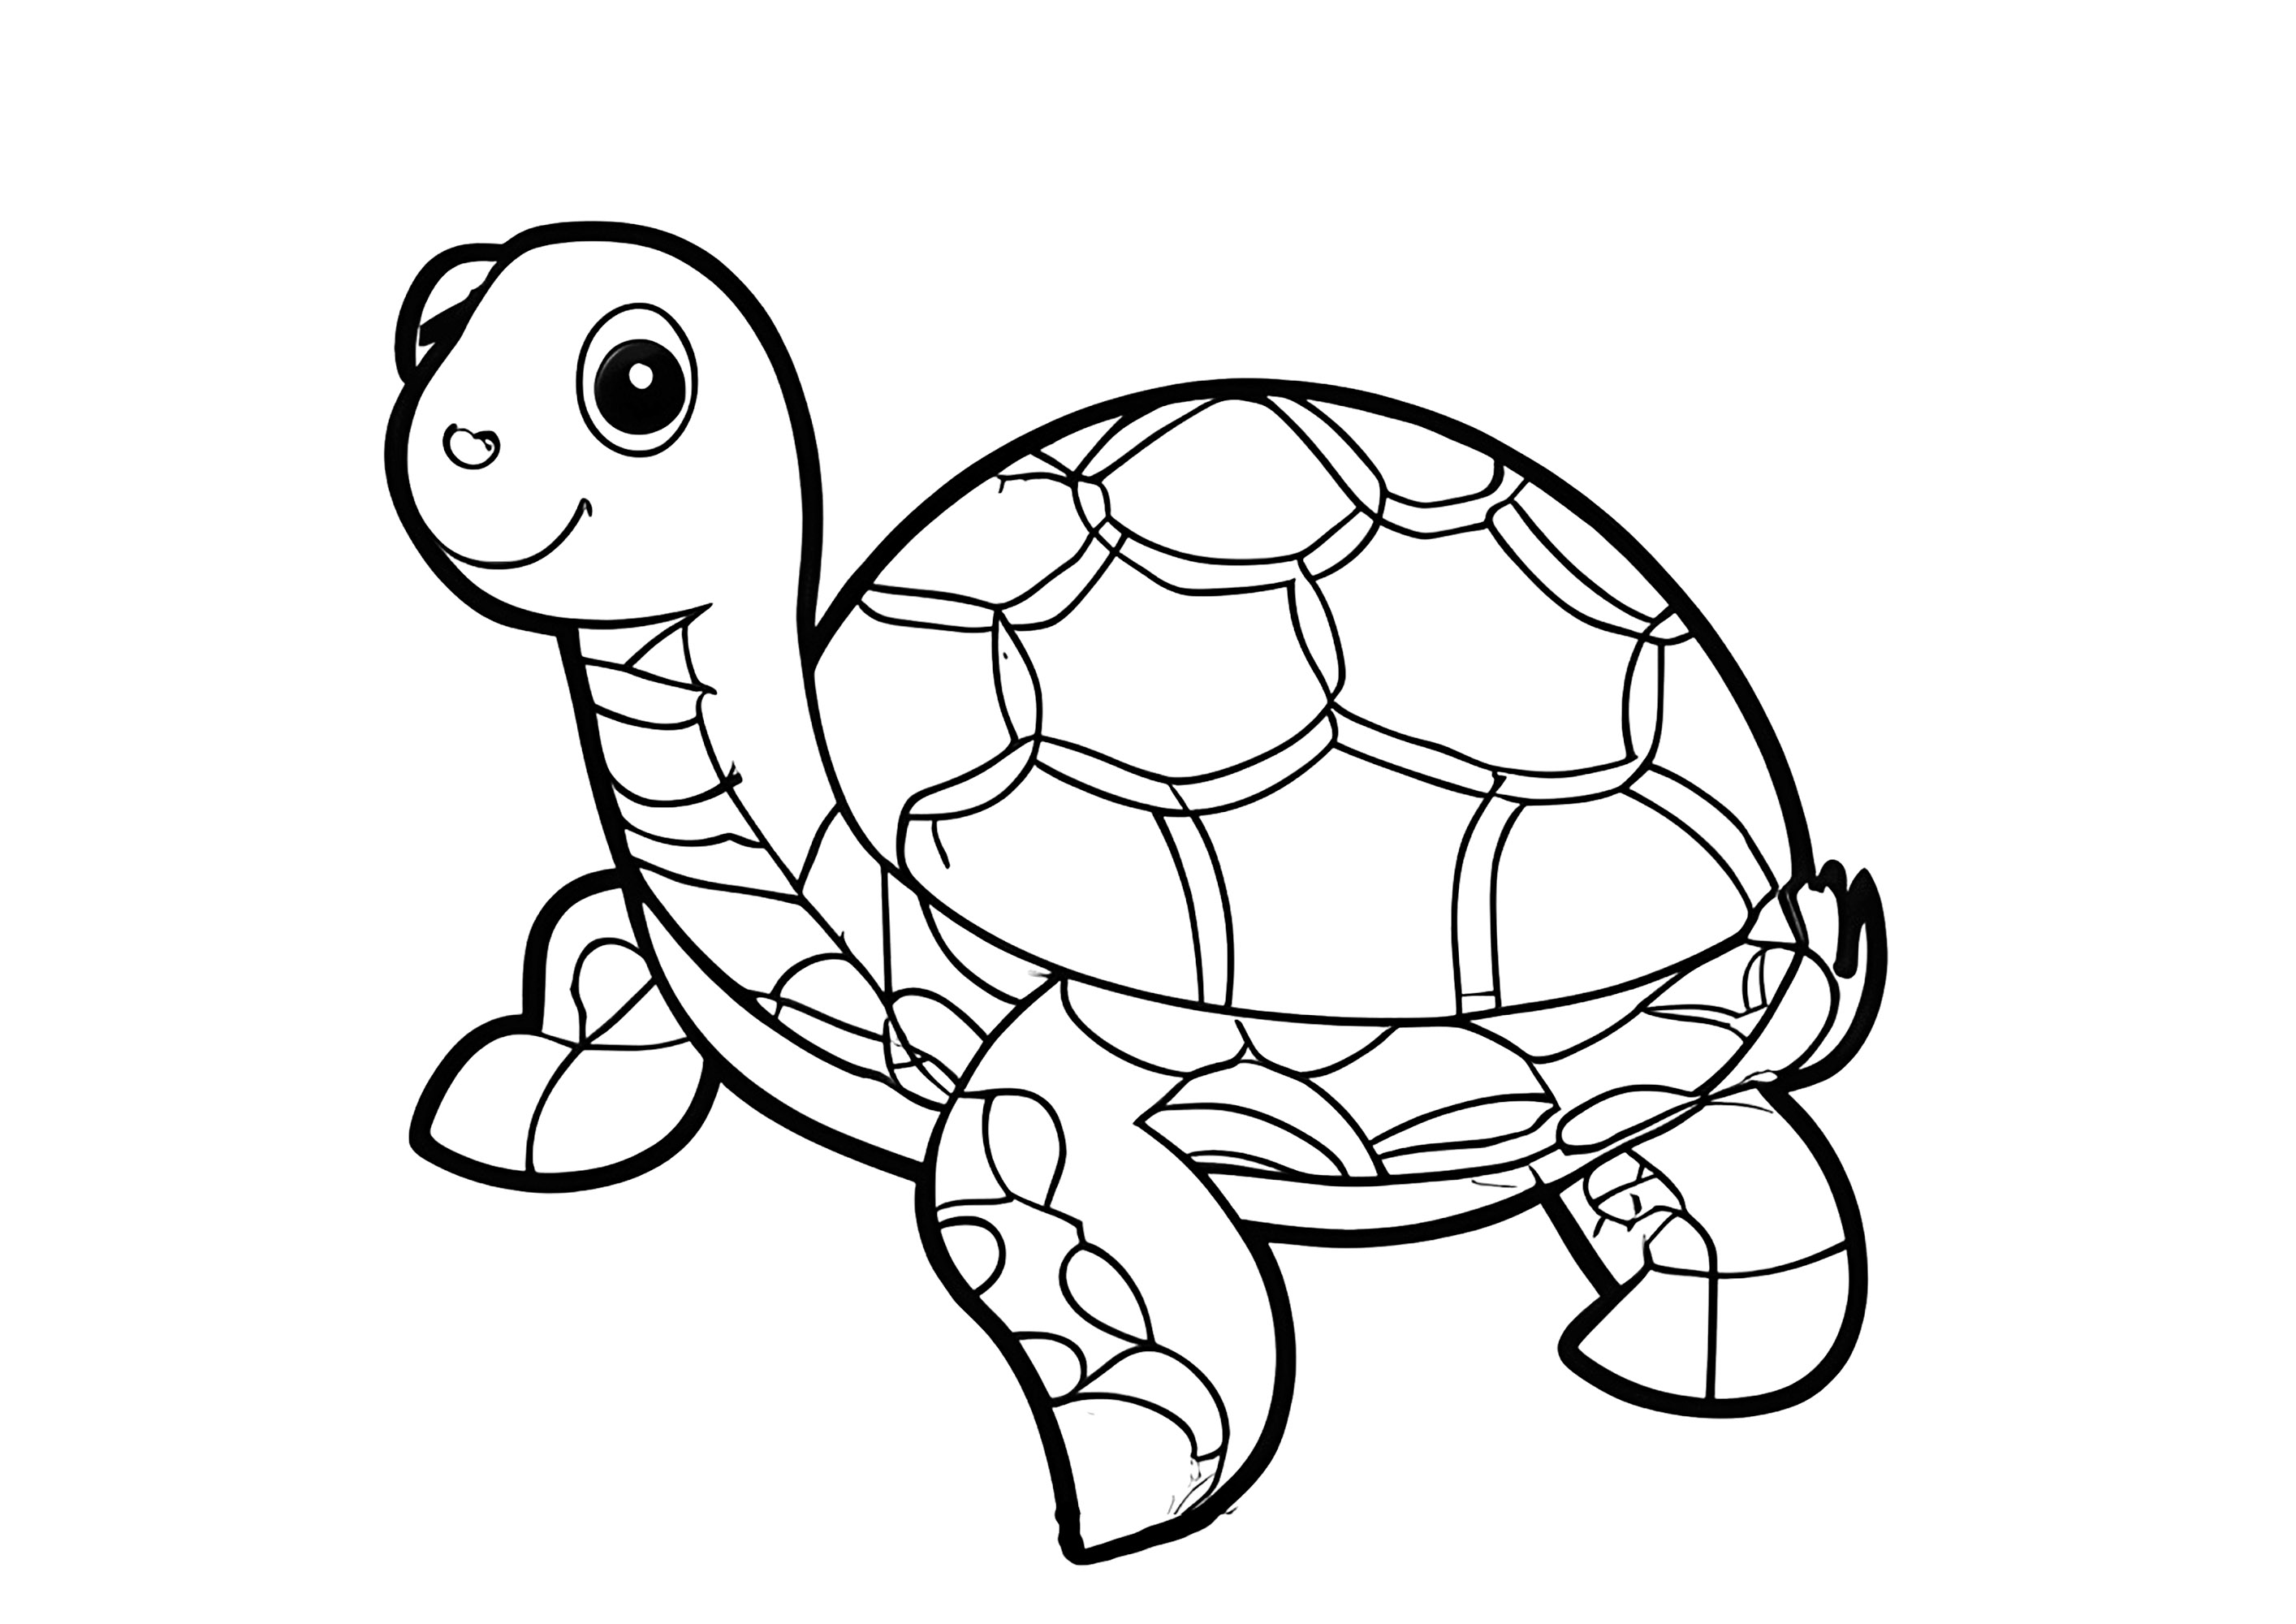 Coloring for kids of a beautiful Turtle with a nice shell